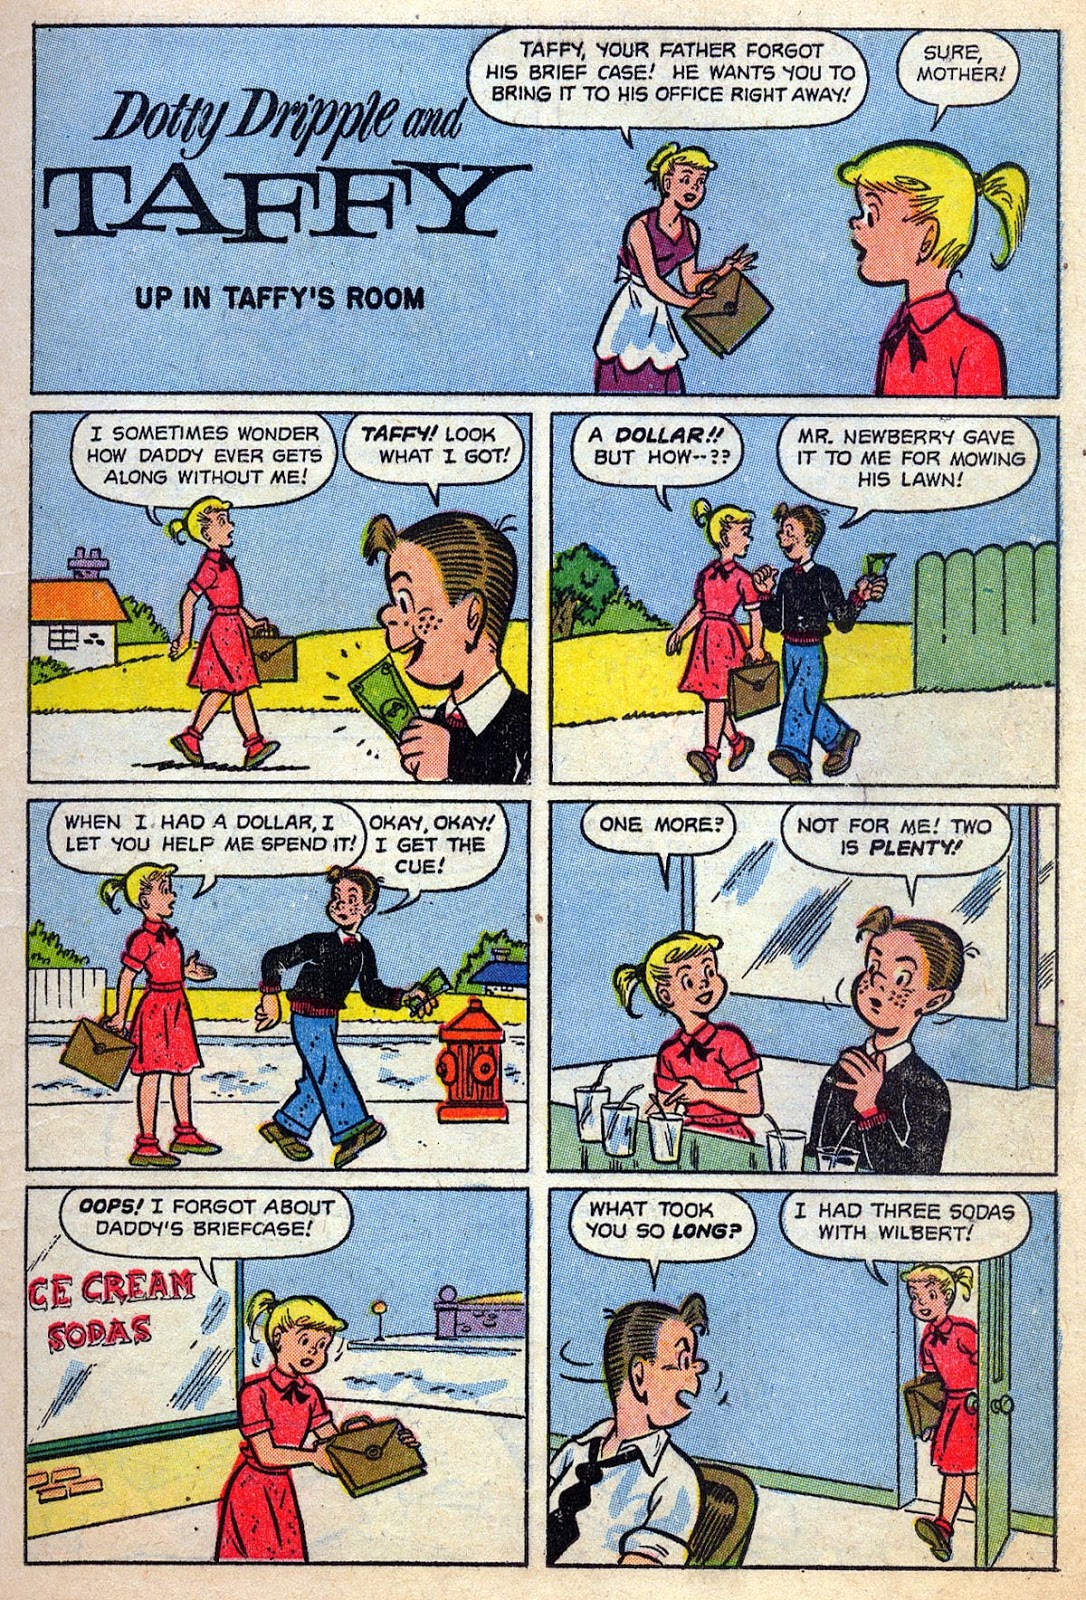 Saved From The Paper Drive Comic Book Short Storydotty -8419